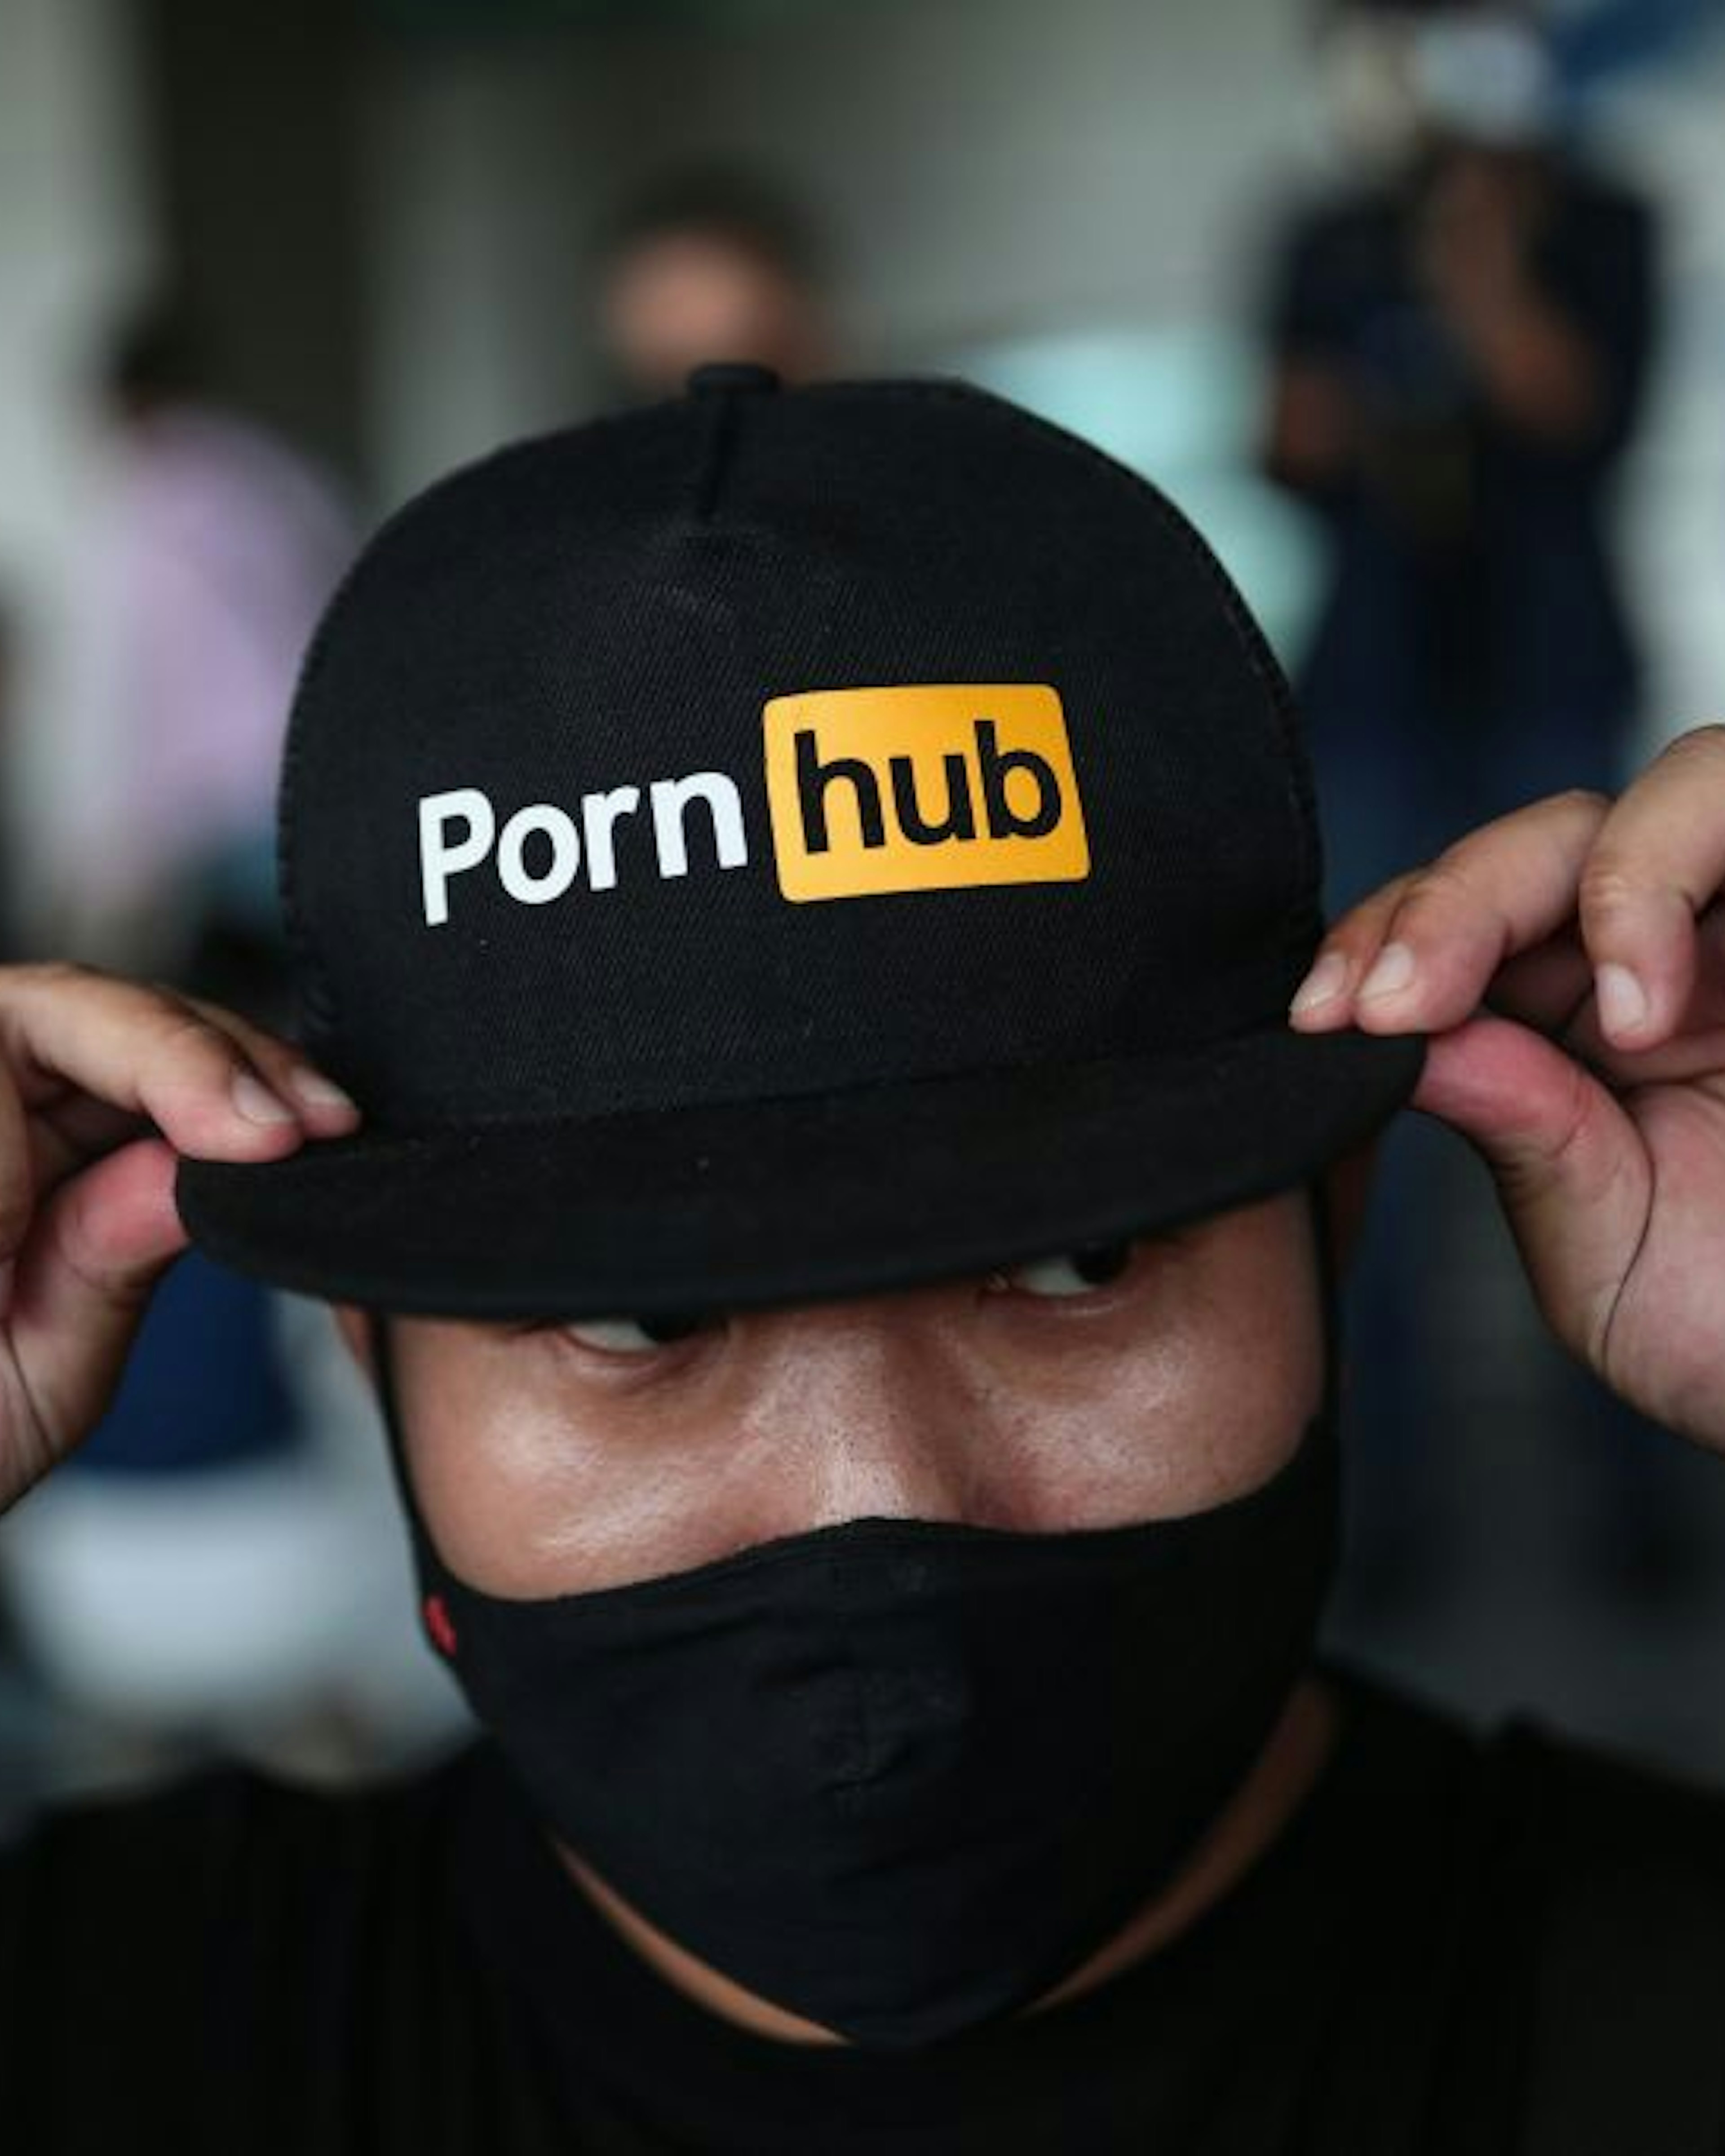 A protester wears a cap with the Pornhub logo during a demonstration at the Ministry of Digital Economy and Society in Bangkok on November 3, 2020, after the website was blocked by the ministry. (Photo by Jack TAYLOR / AFP) (Photo by JACK TAYLOR/AFP via Getty Images)